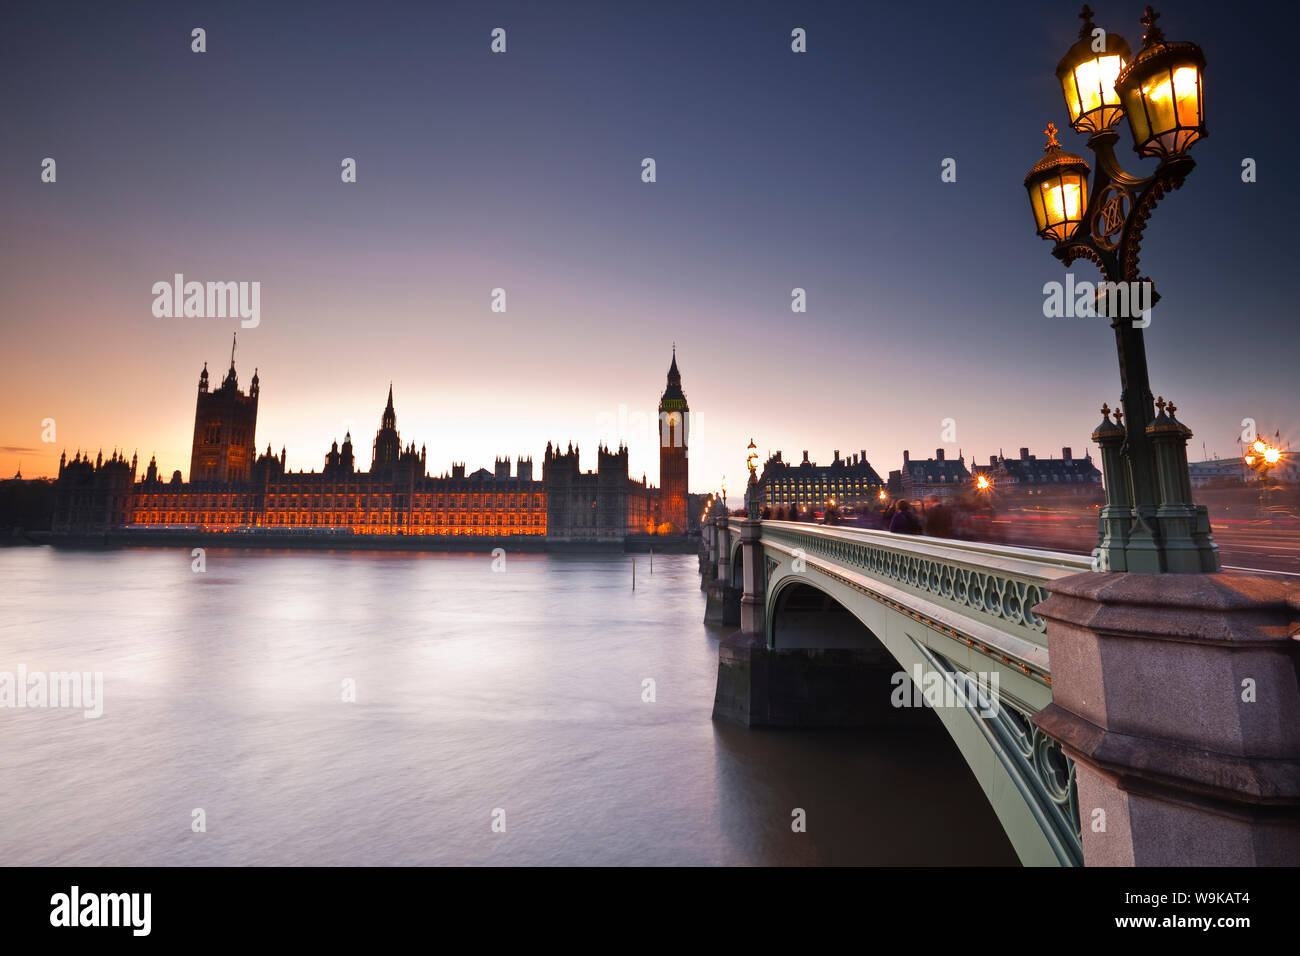 Looking across the River Thames towards the Houses of Parliament and Westminster Bridge, London, England, United Kingdom, Europe Stock Photo